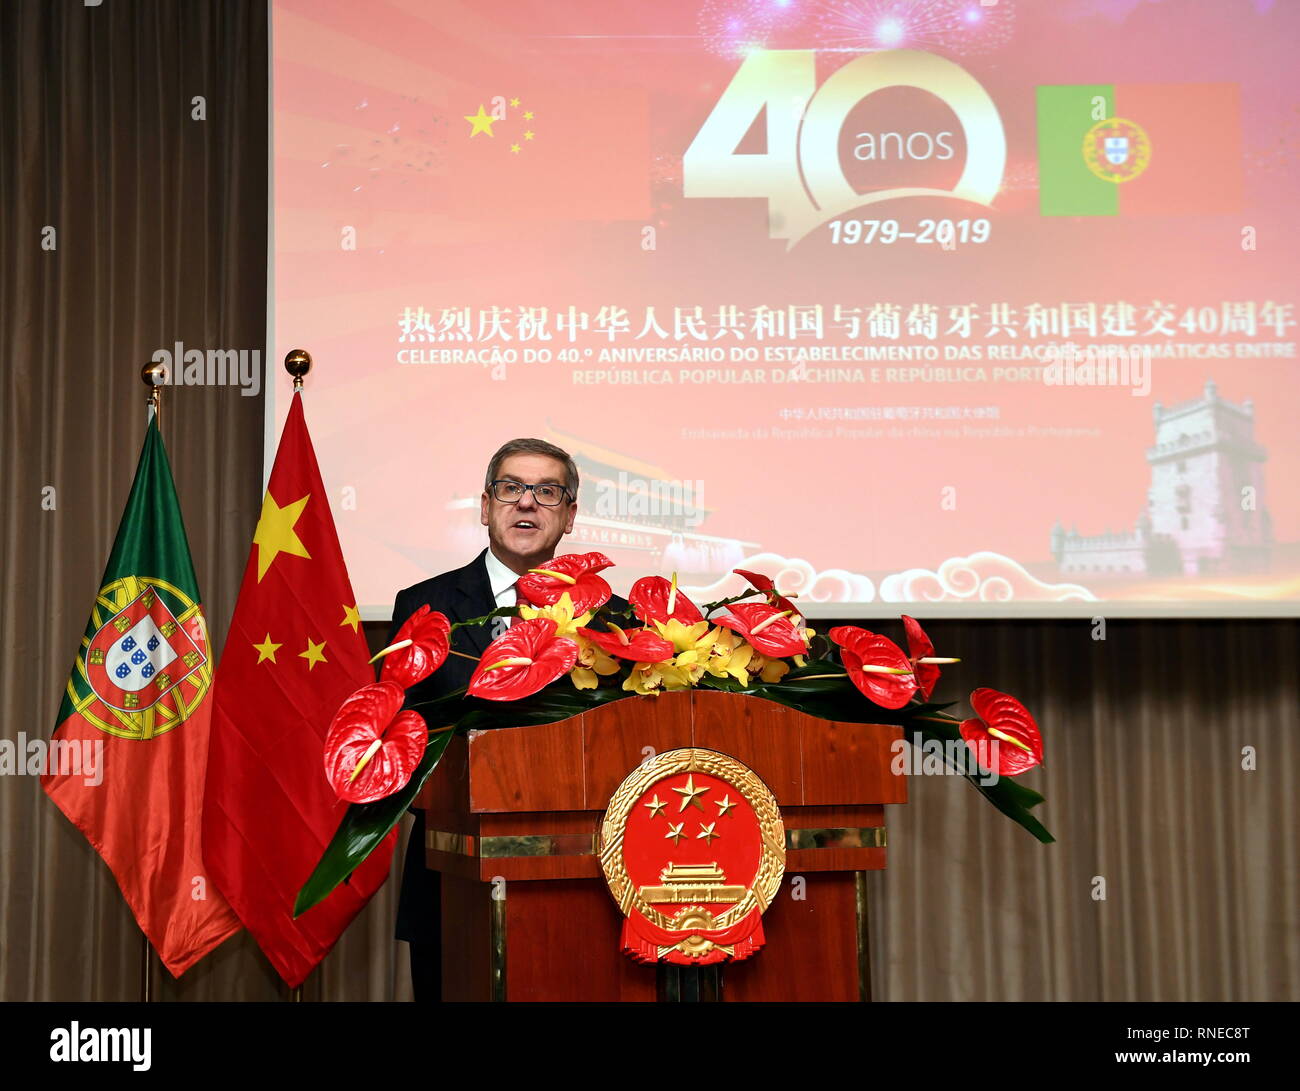 Lisbon, China and Portugal. 18th Feb, 2019. Jorge Lacao, representative of the president of the Portuguese parliament and deputy parliament speaker, addresses a reception marking the 40th anniversary of the establishment of the diplomatic ties between China and Portugal, in Lisbon Feb. 18, 2019. The Chinese Embassy to Portugal on Monday held the reception to celebrate the 40th anniversary of the establishment of the China-Portugal diplomatic relations. Credit: Zhang Liyun/Xinhua/Alamy Live News Stock Photo